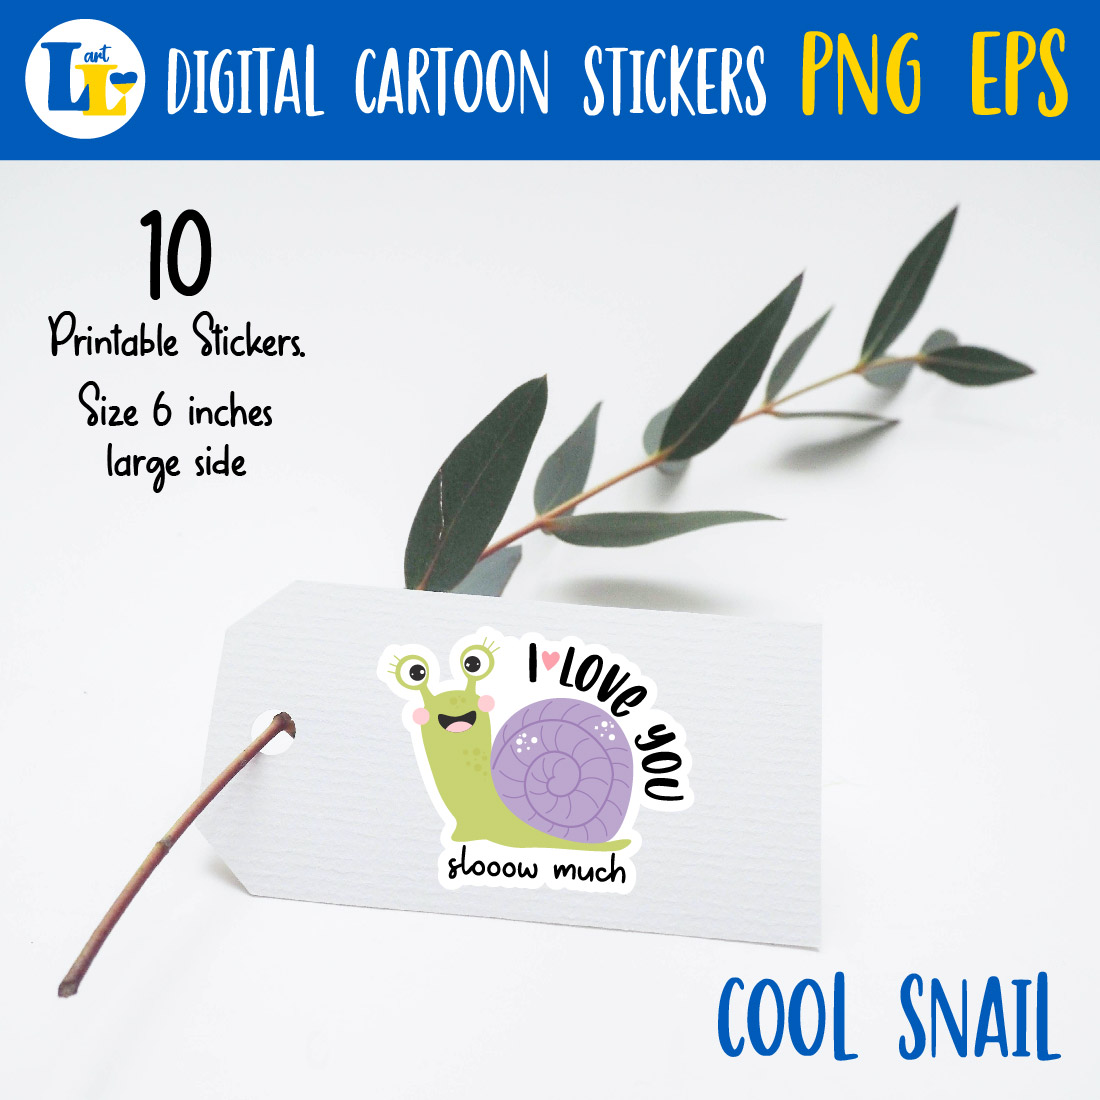 Cute Snails and Slogans Printable Digital Stickers